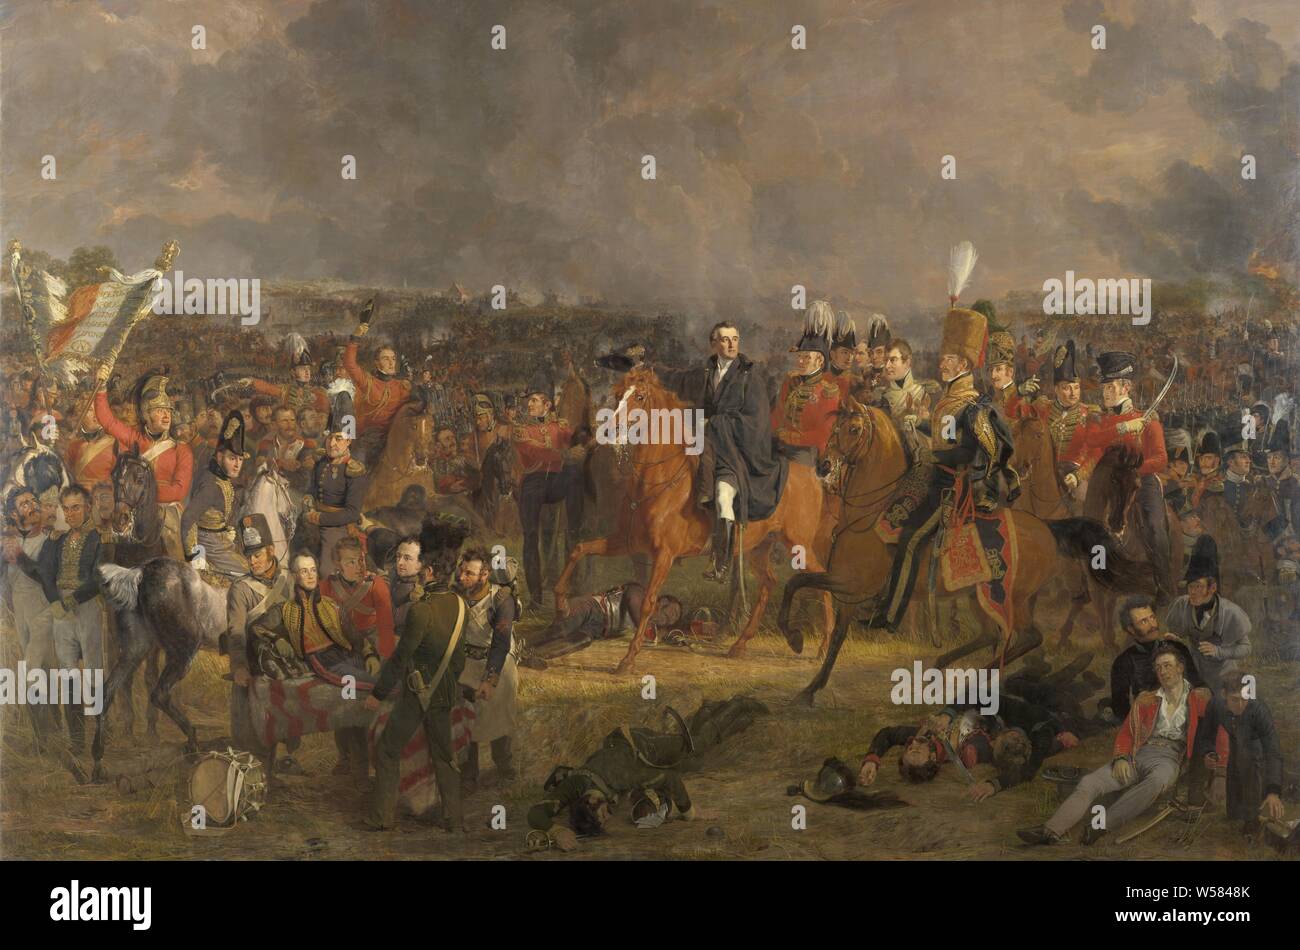 The Battle of Waterloo, June 18, 1815. View of the battlefield when the English commander Wellington hears that Prussian aid is on its way. The wounded William, Prince of Orange, is taken away in the left foreground. The commanders and other officers on horseback are in the middle, on the right in the foreground wounded and dead soldiers. In the background the fighting rages on the battlefield. The following are also portrayed: Lieutenant-general Lord Uxbridge, Sir Rowland Hill, Staff Colonel Sir William Delancey, Major-General George Cooke, Colonel Harvey, Colonel Campbell. Lieutenant General Stock Photo